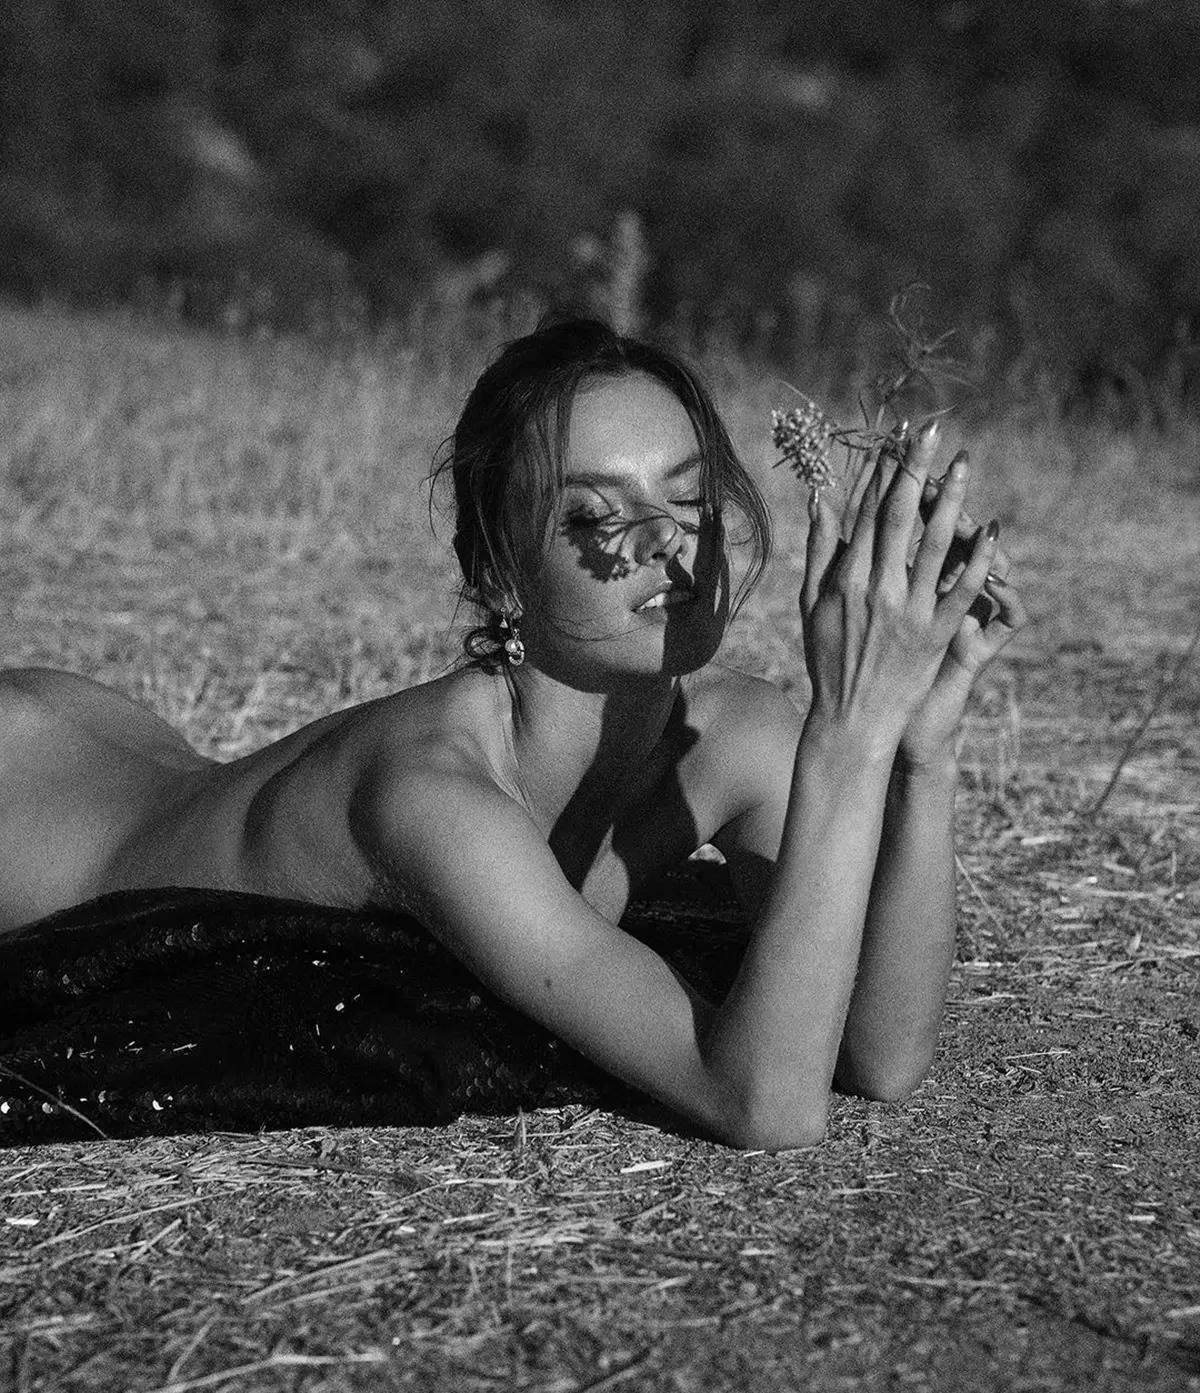 Alessandra Ambrósio ups the glam quotient with her bewitching photos